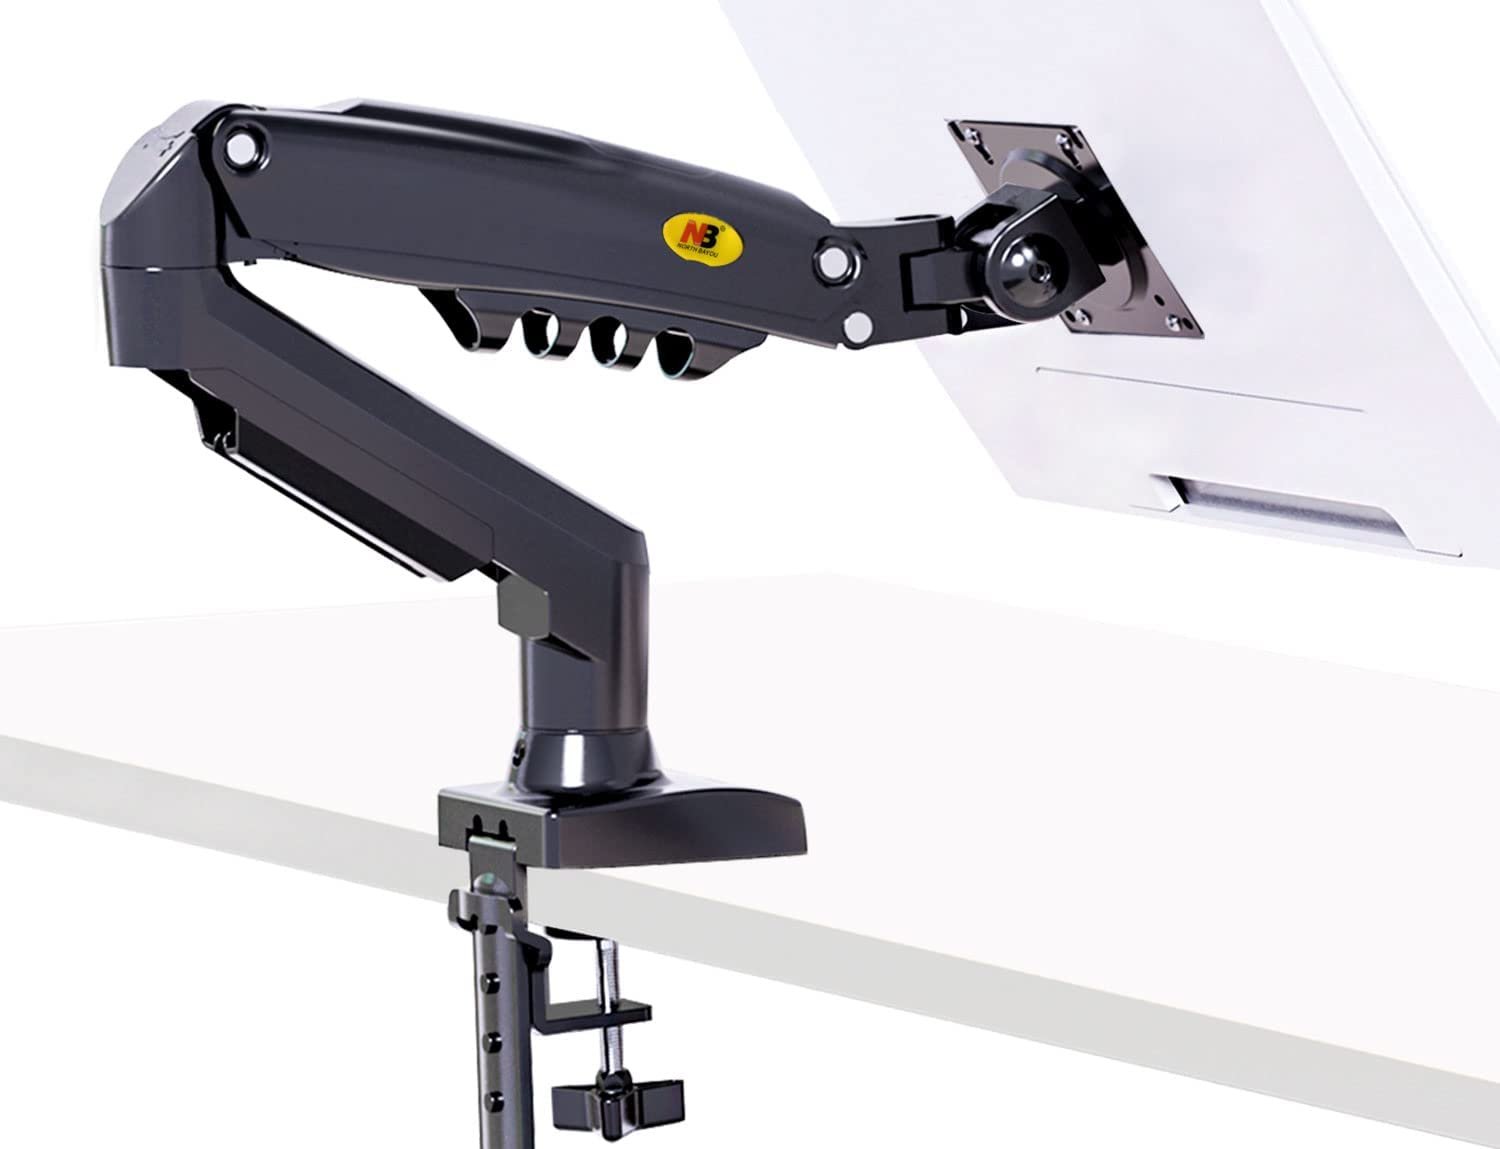 north bayou, monitor arm, monitor stand price in nepal, monitor arm price in nepal